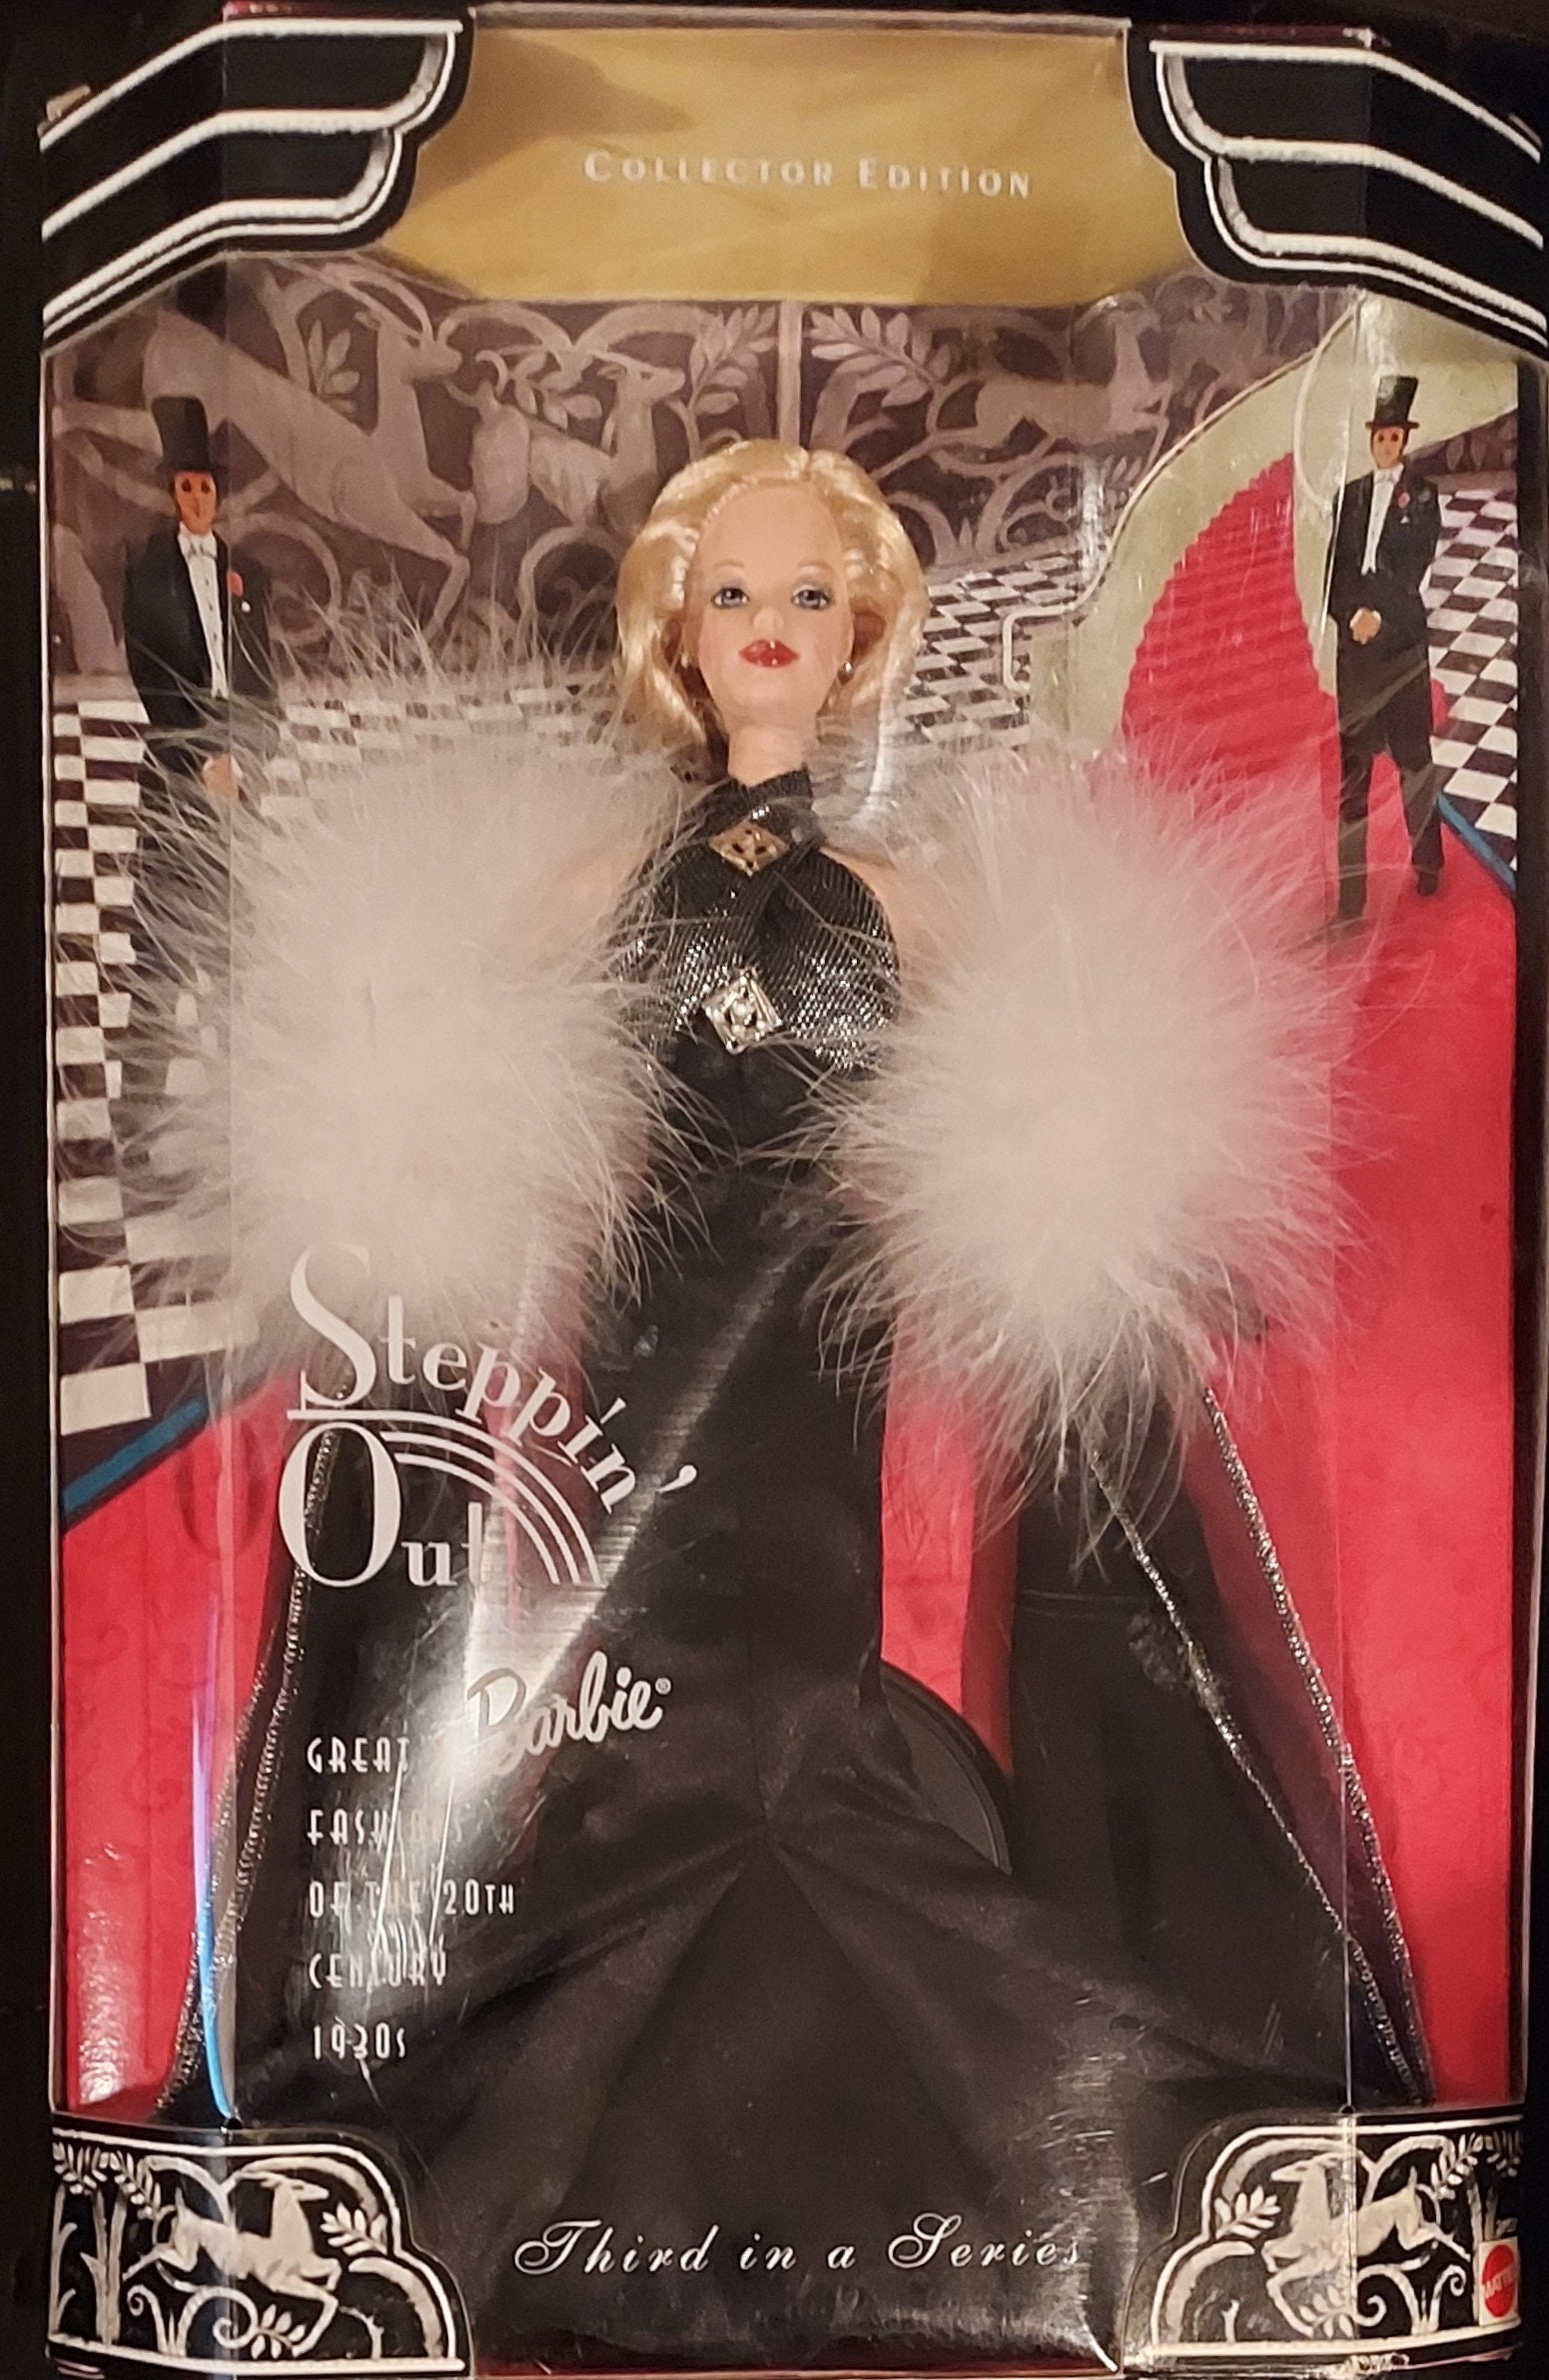 BARBIE, Steppin' Out - Great Fashions of the 20th century 1930's - Collector Edition, 1998 Mattel, NRFB